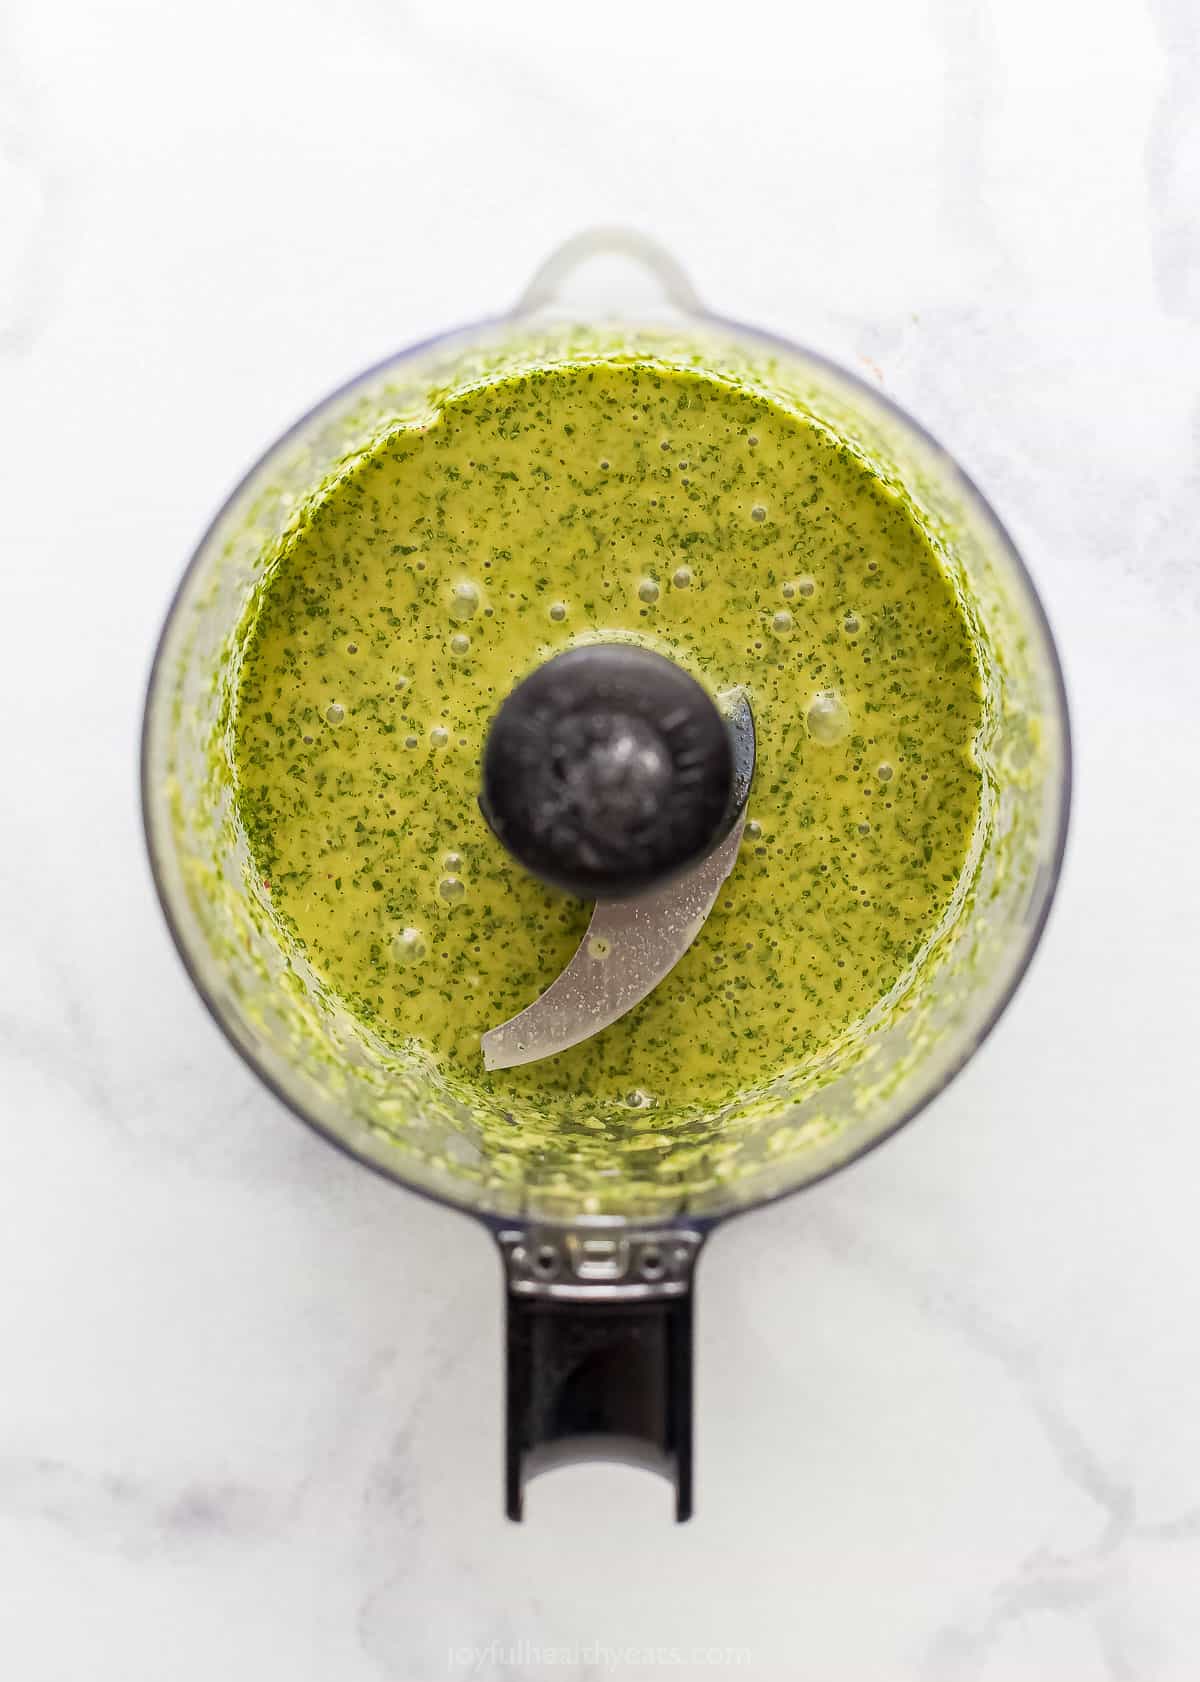 Homemade cilantro lime dressing inside of a food processor on a kitchen countertop